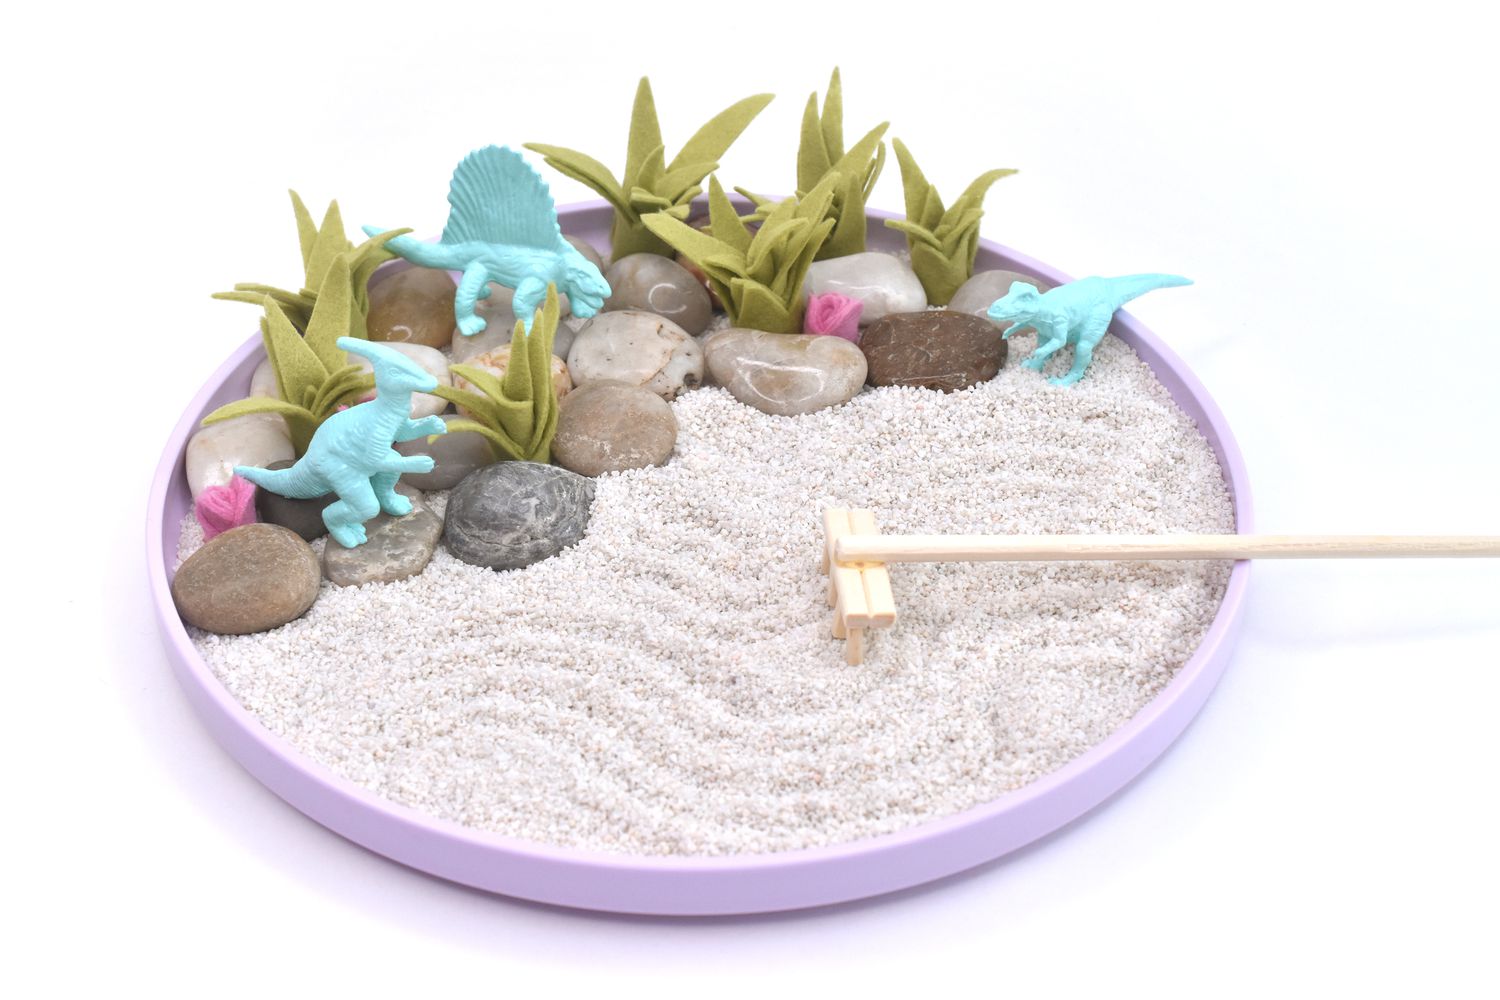 Make an Adorable Mini Mindfulness Garden With Dinosaurs